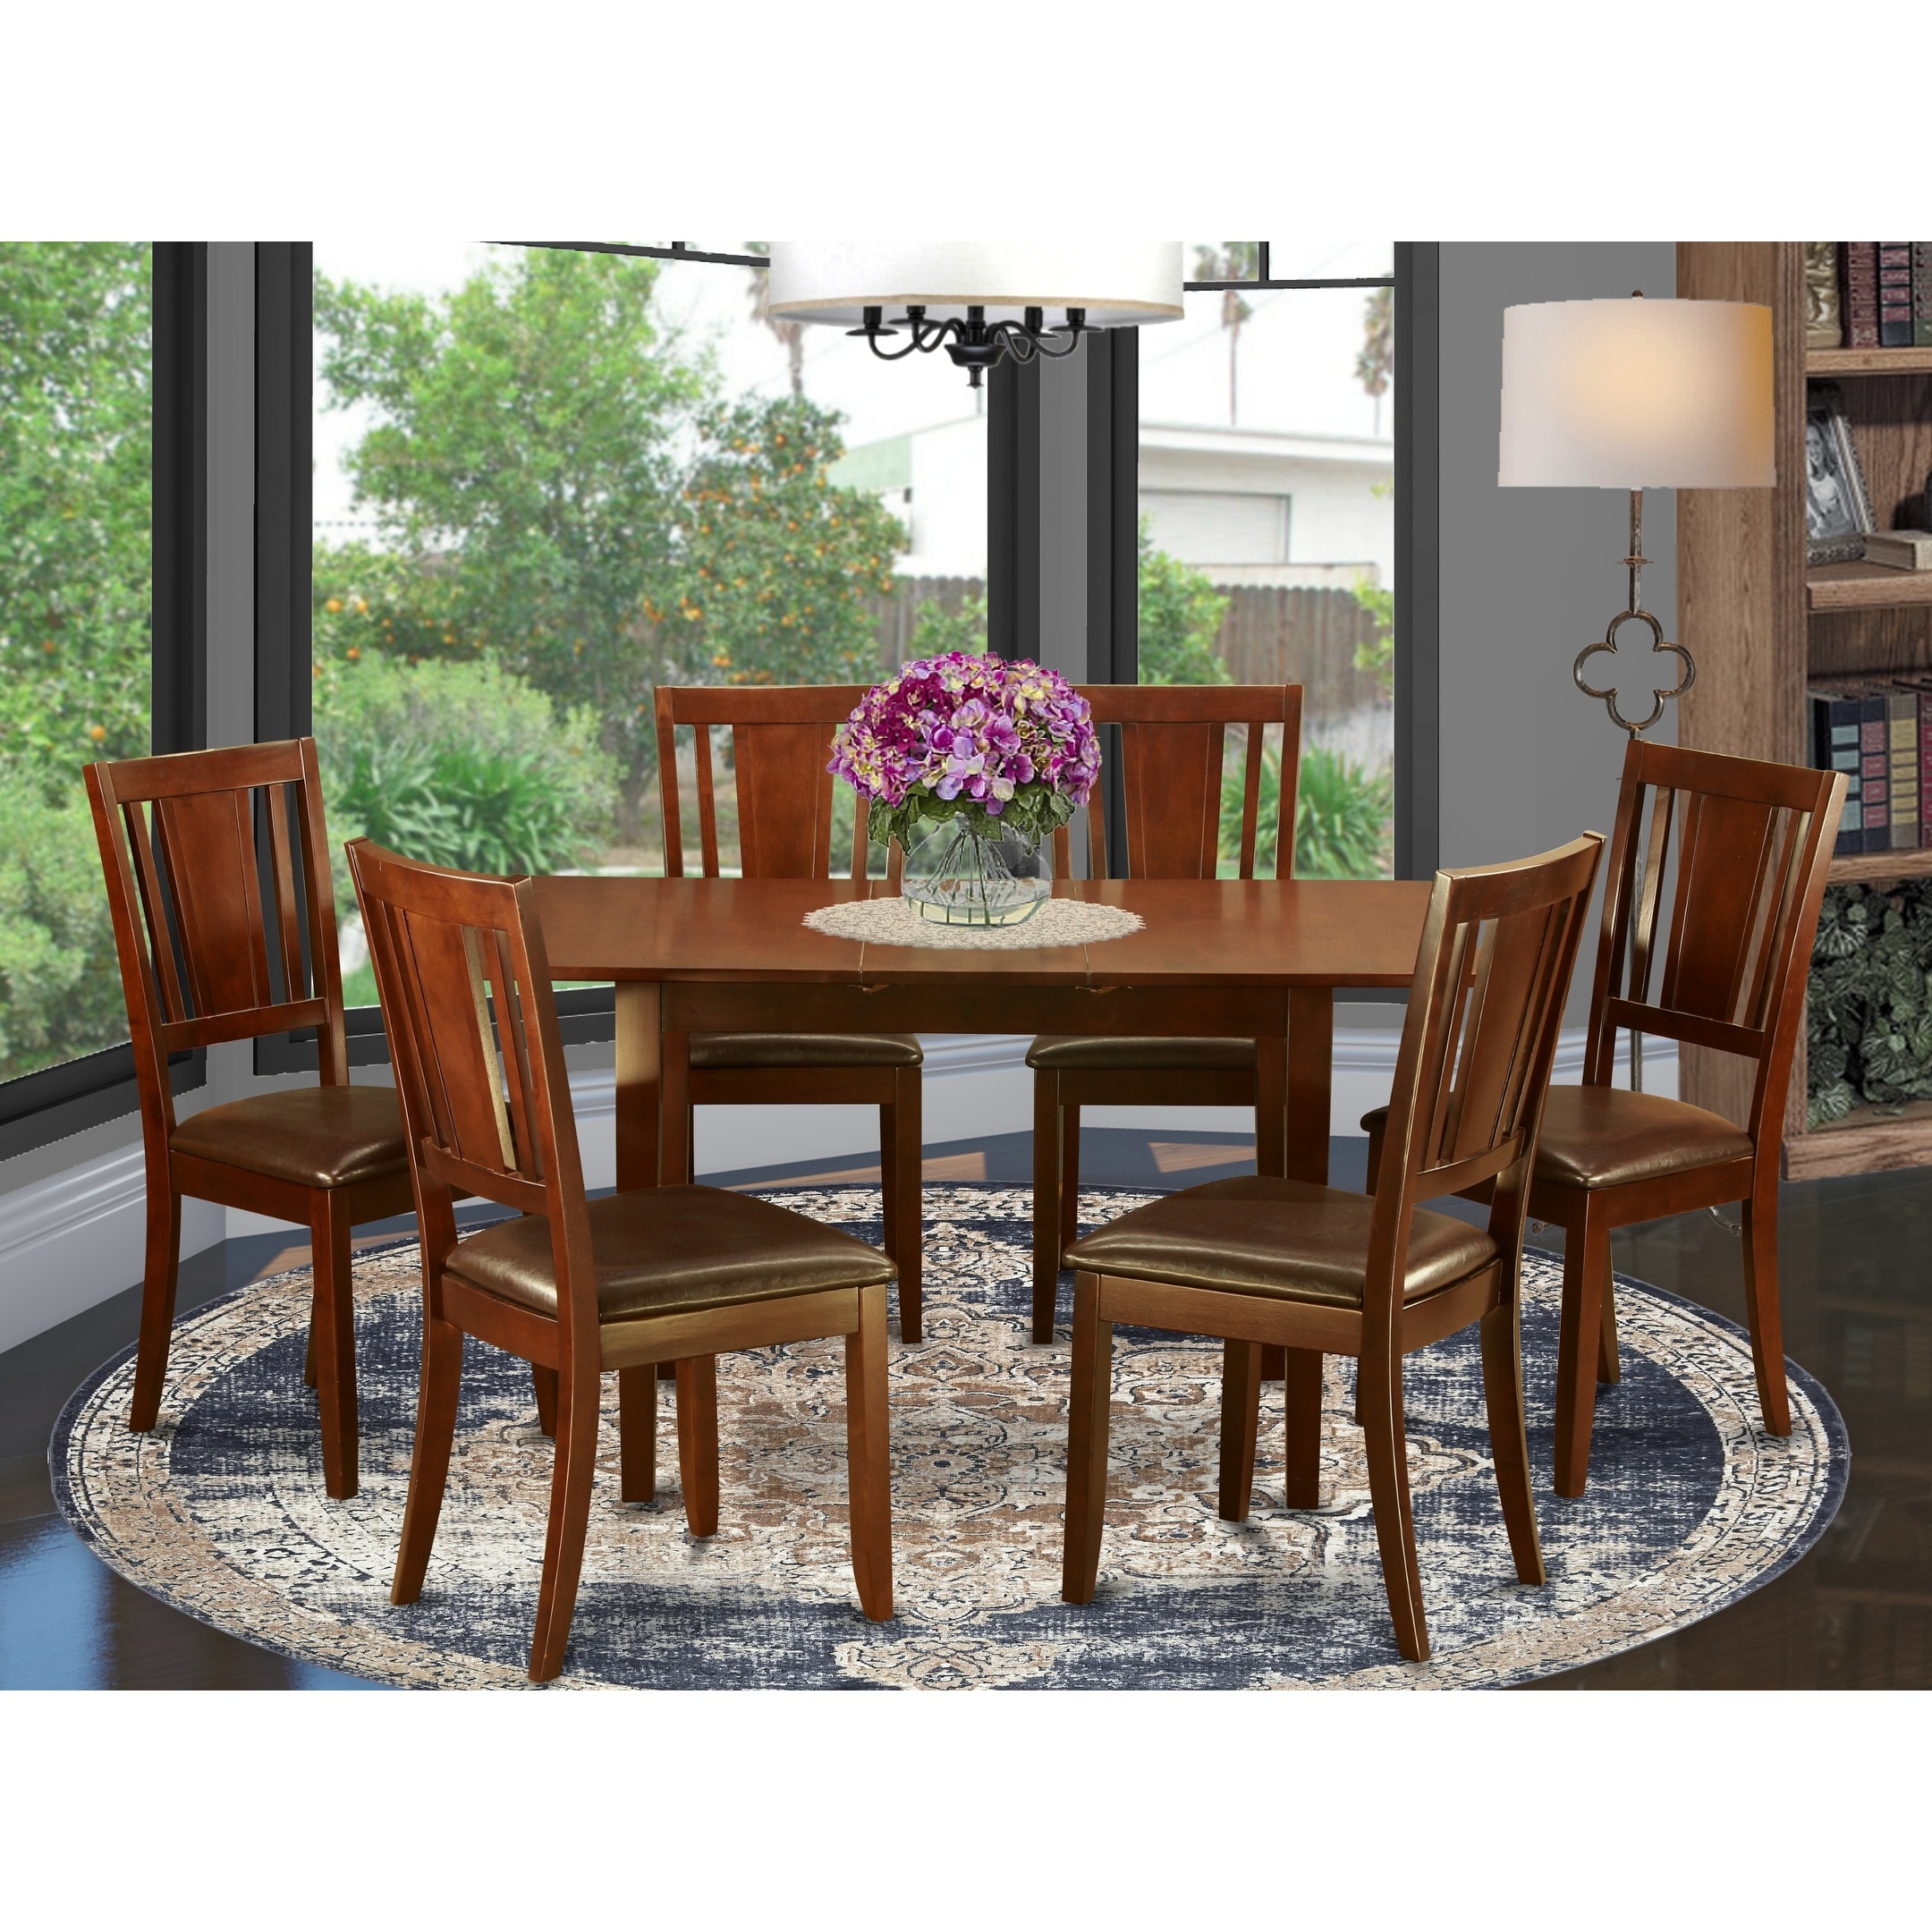 East West Furniture LLC 7-piece Dining Table Set with Extender Leaf Dining Table and Kitchen Chairs in Mahogany Finish (Chairs Option)